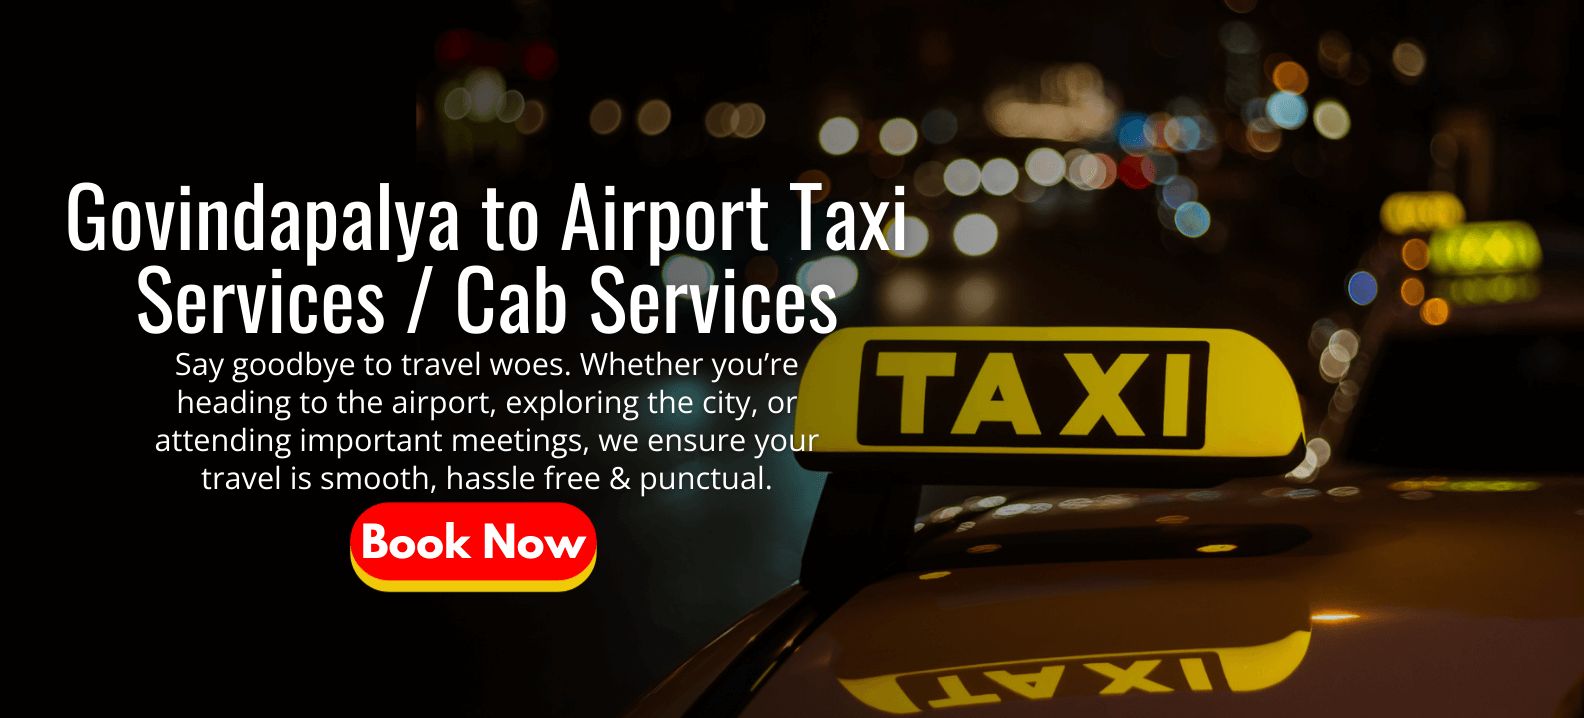 Govindapalya to Airport Taxi Services _ Cab Services